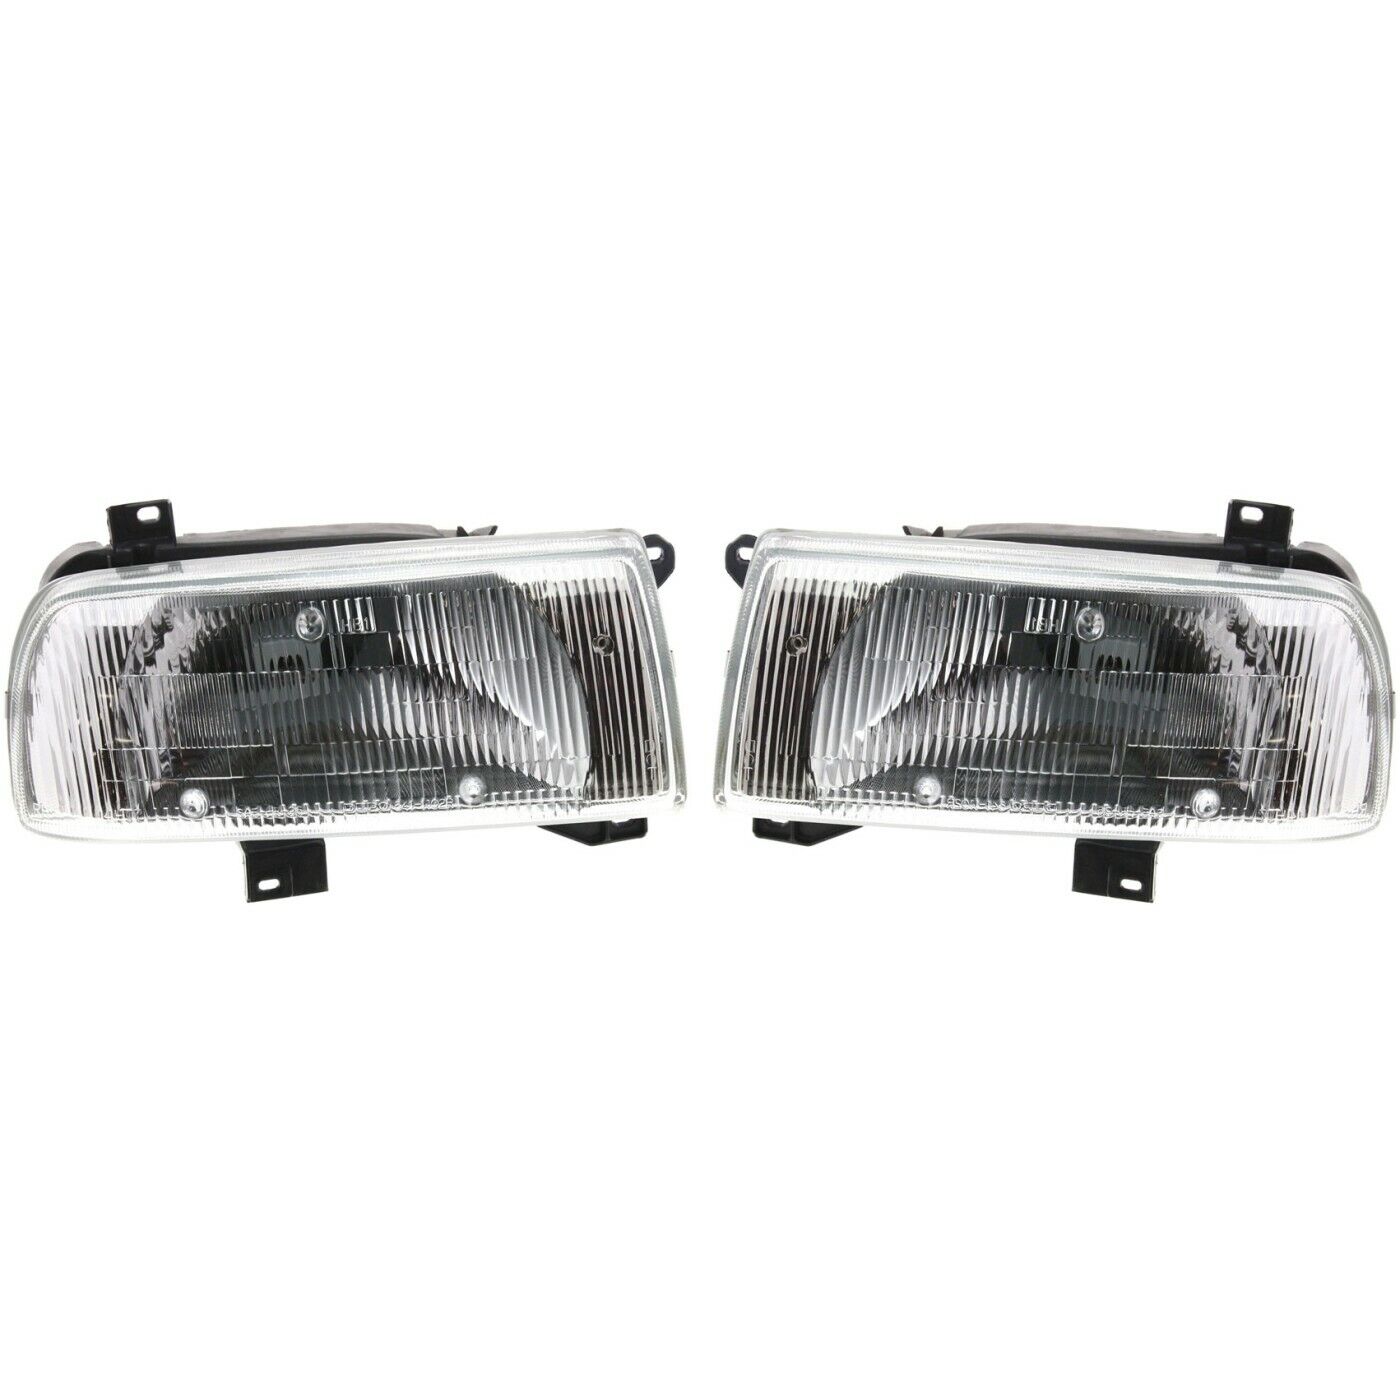 Headlight Set For 93 94 95 96 97 98 99 Volkswagen Jetta Left and Right 2Pc